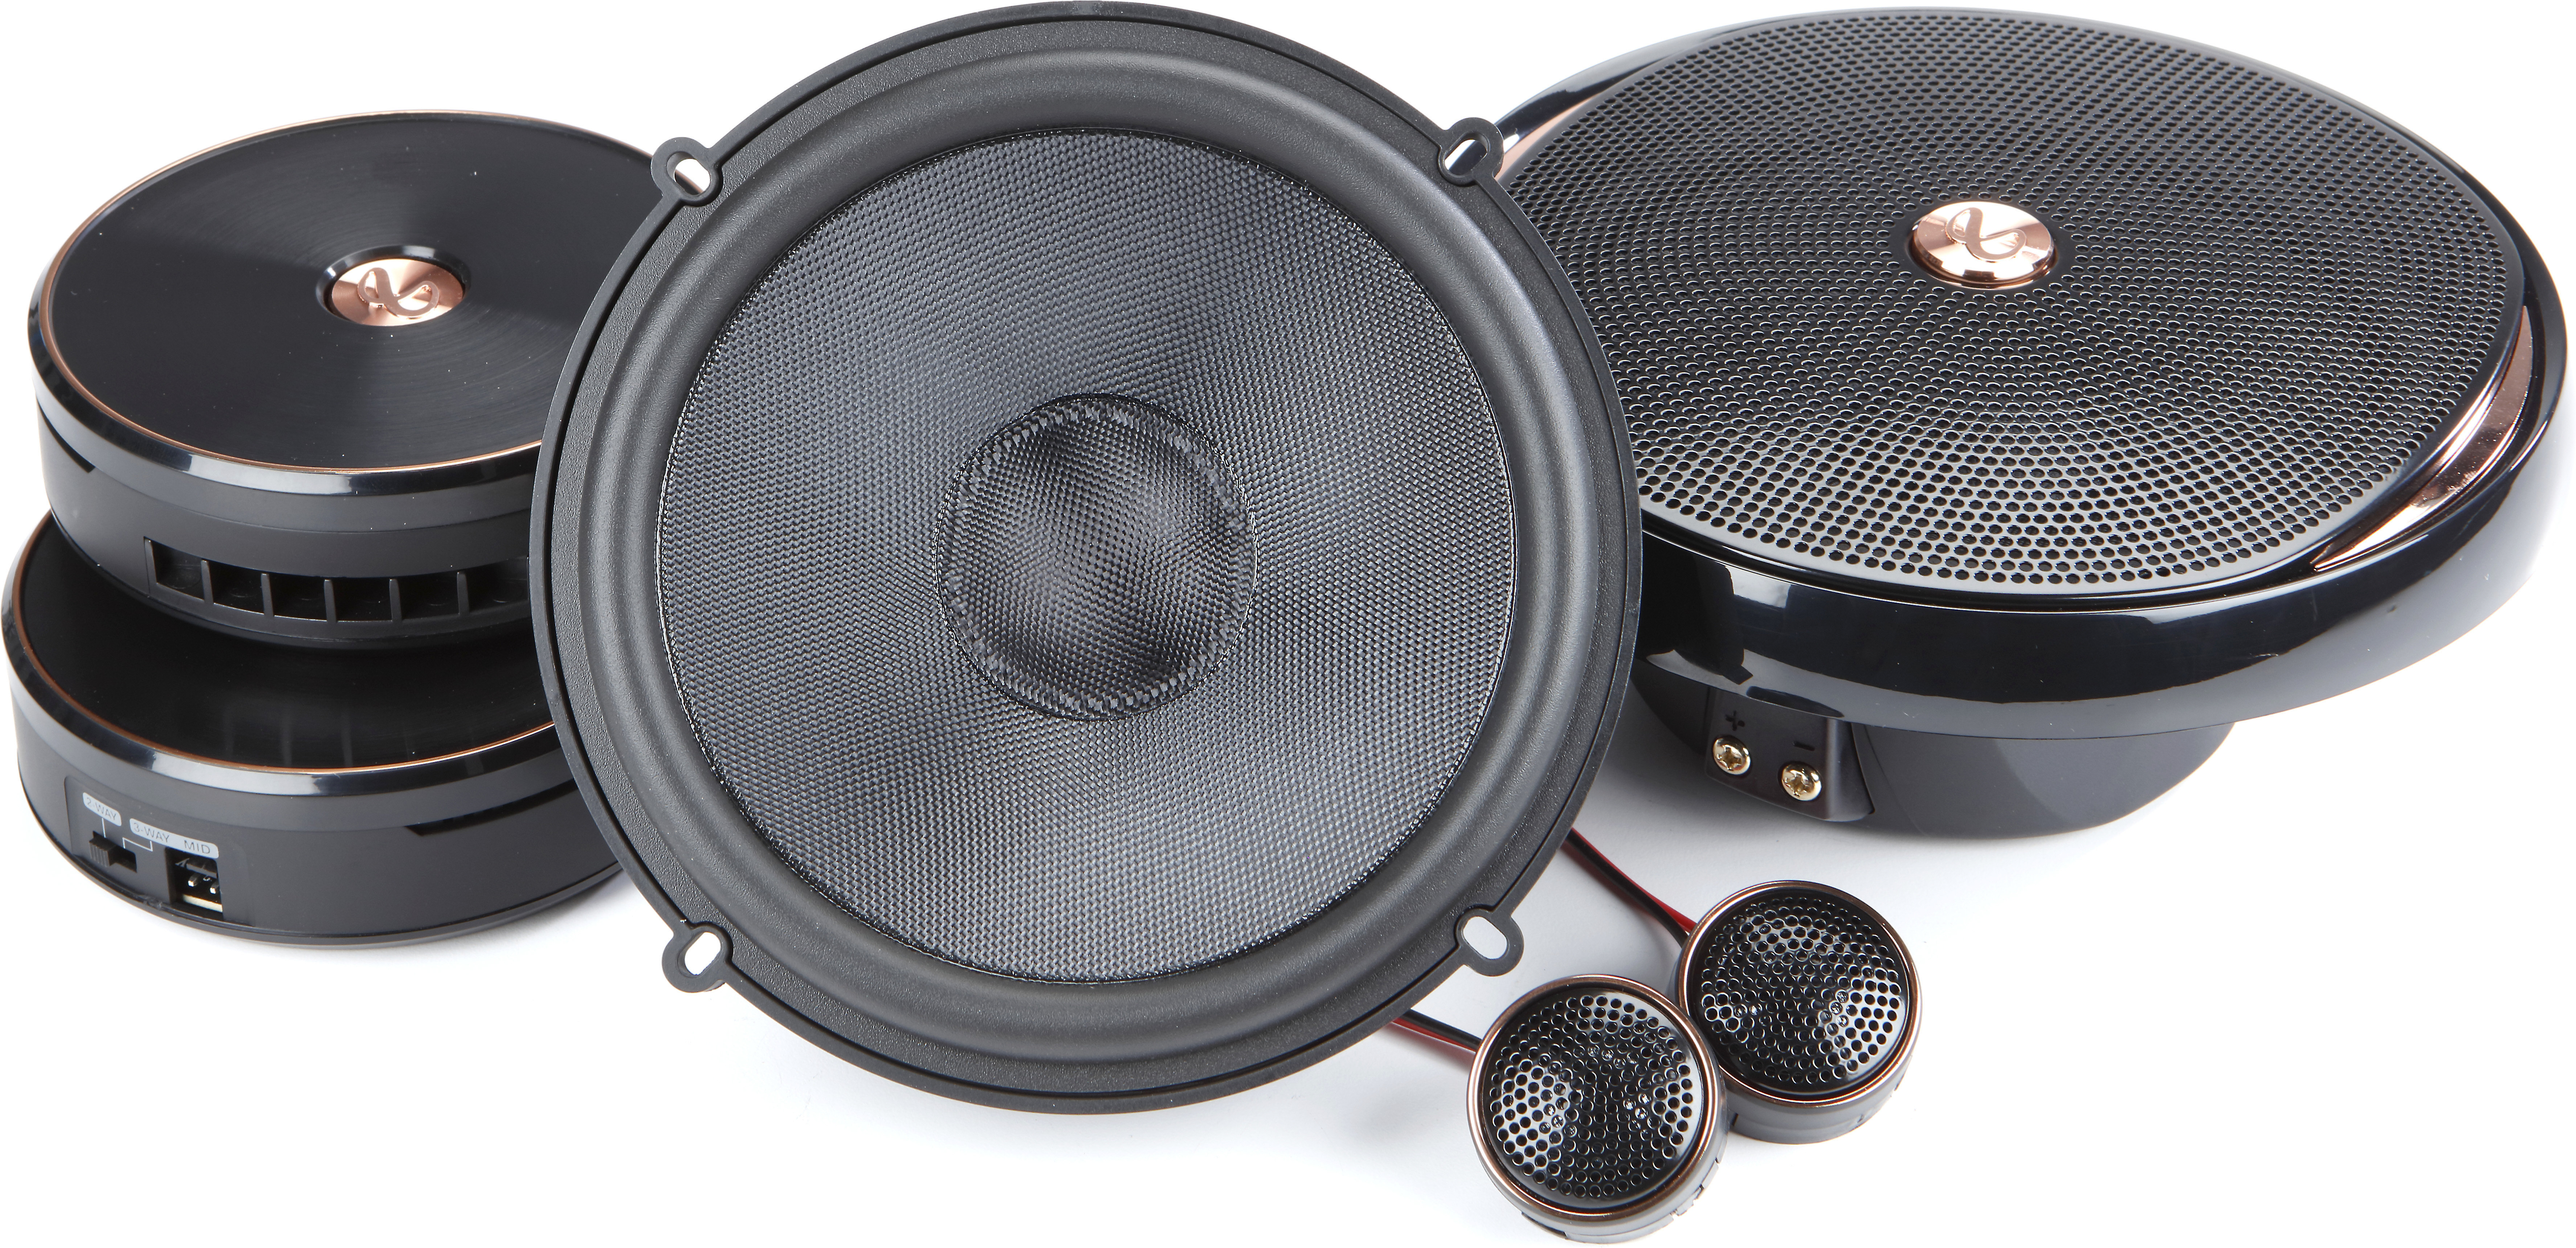 Customer Reviews: Infinity Kappa Series 6-1/2" component speaker system at Crutchfield